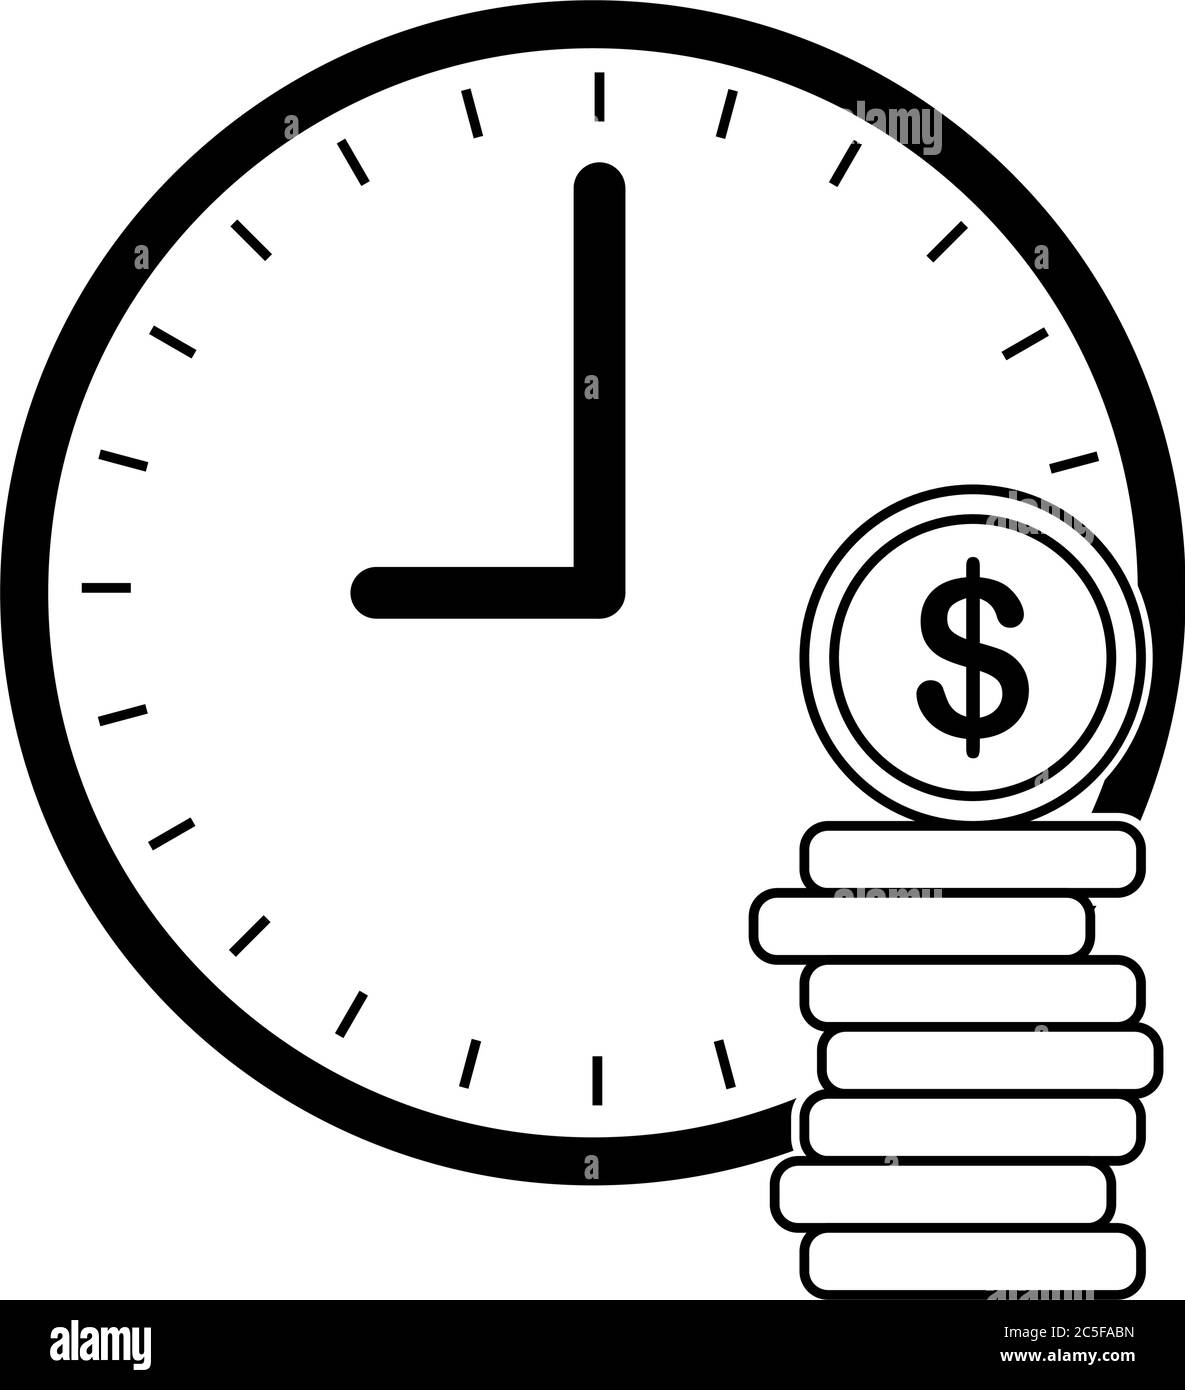 Clock with a stack of coins icon isolate vector illustration. Time is money business financial ideas concept. Stock Vector